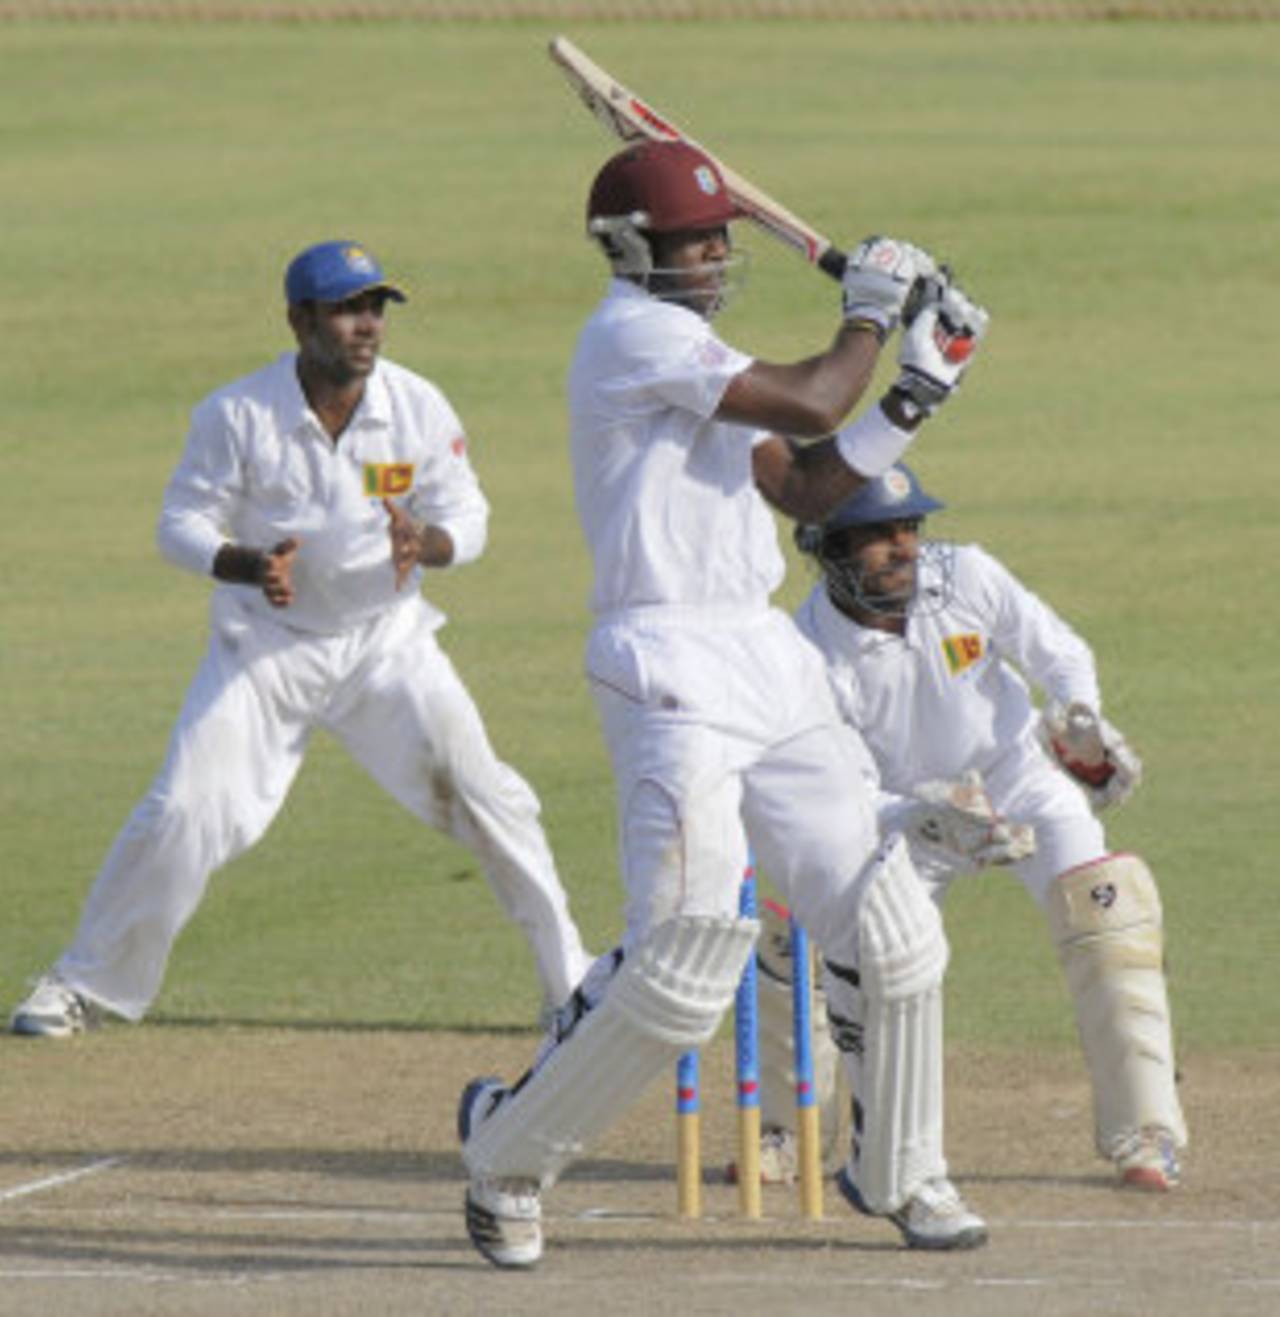 Kirk Edwards plays a pull shot, West Indies A v Sri Lanka A, 1st unofficial Test, 2nd day, St Kitts, June 6, 2013